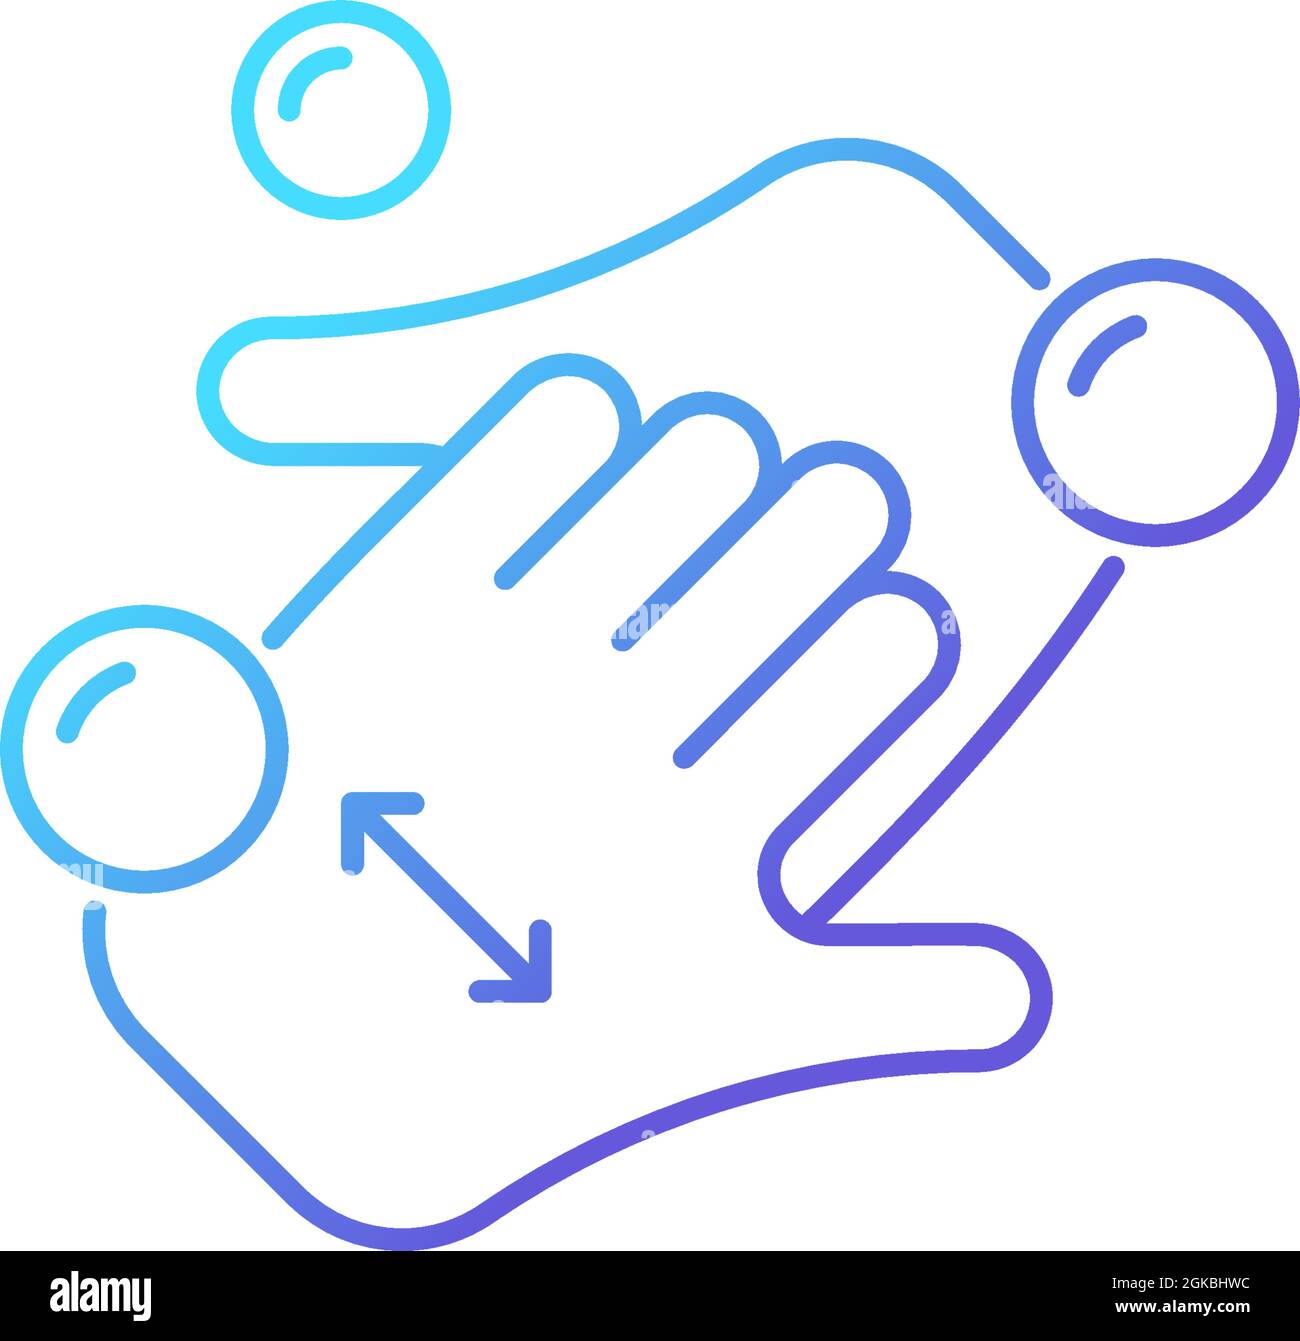 Cup fingers gradient linear vector icon Stock Vector